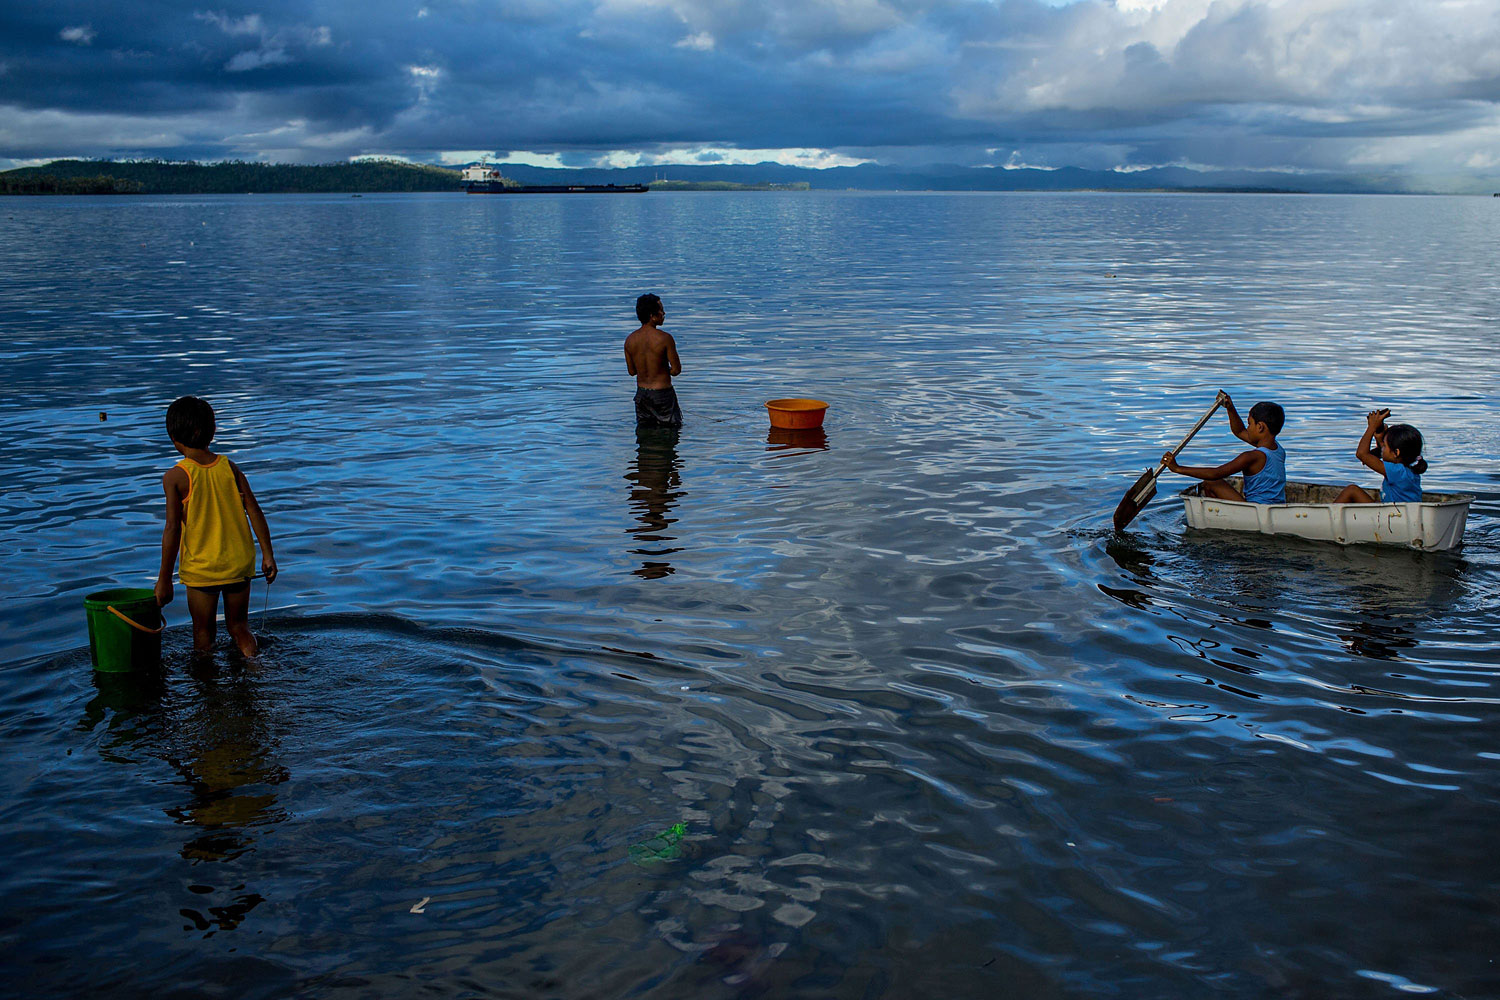 People enjoy the water off the coast of a destroyed town on April 18, 2014 in Tacloban.